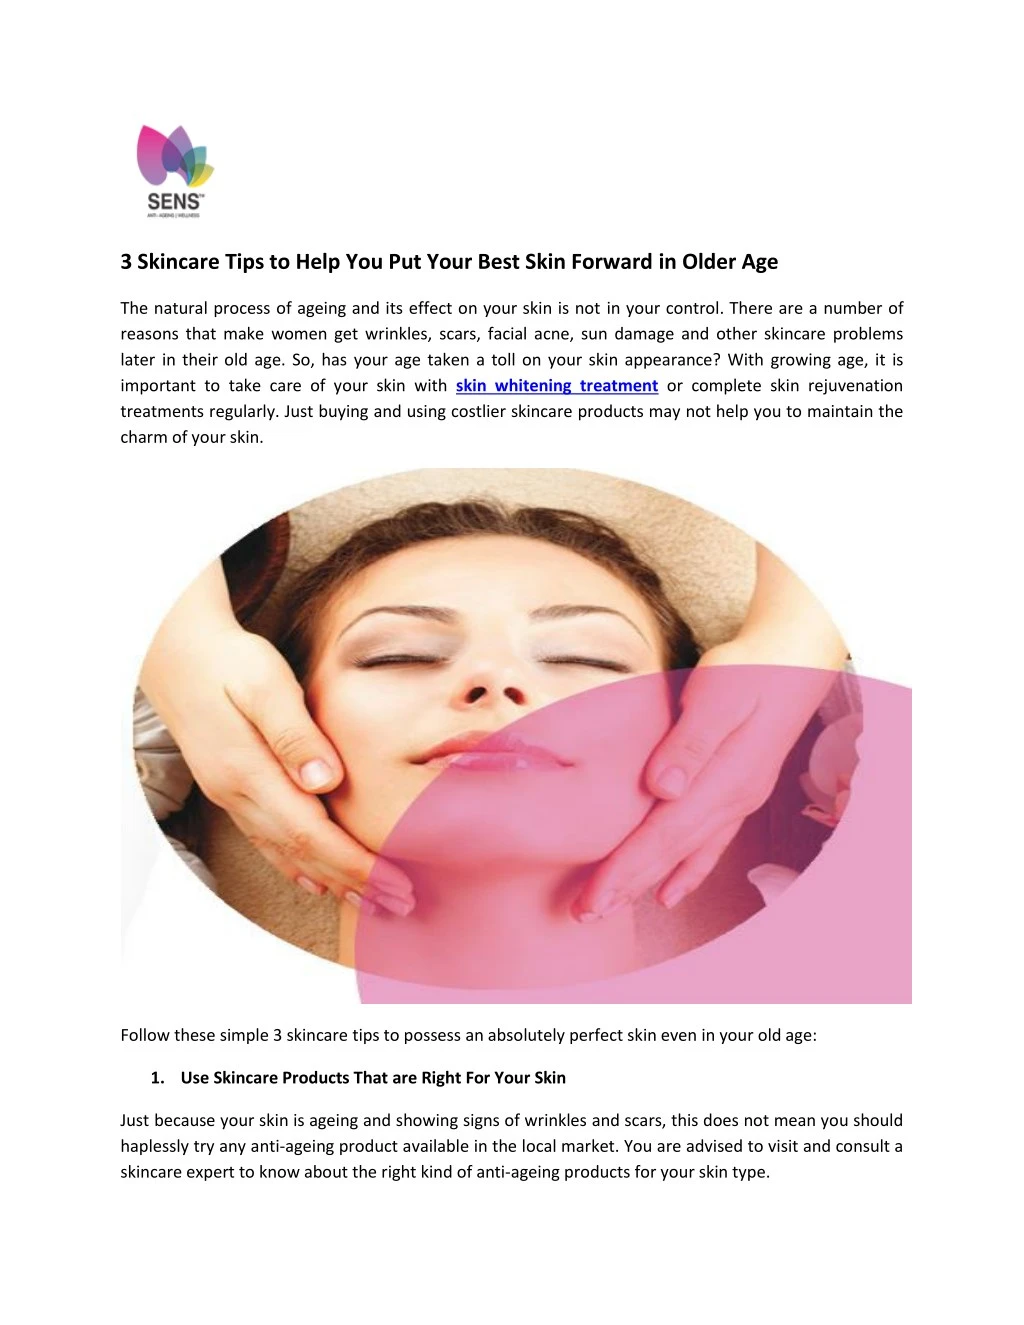 3 skincare tips to help you put your best skin